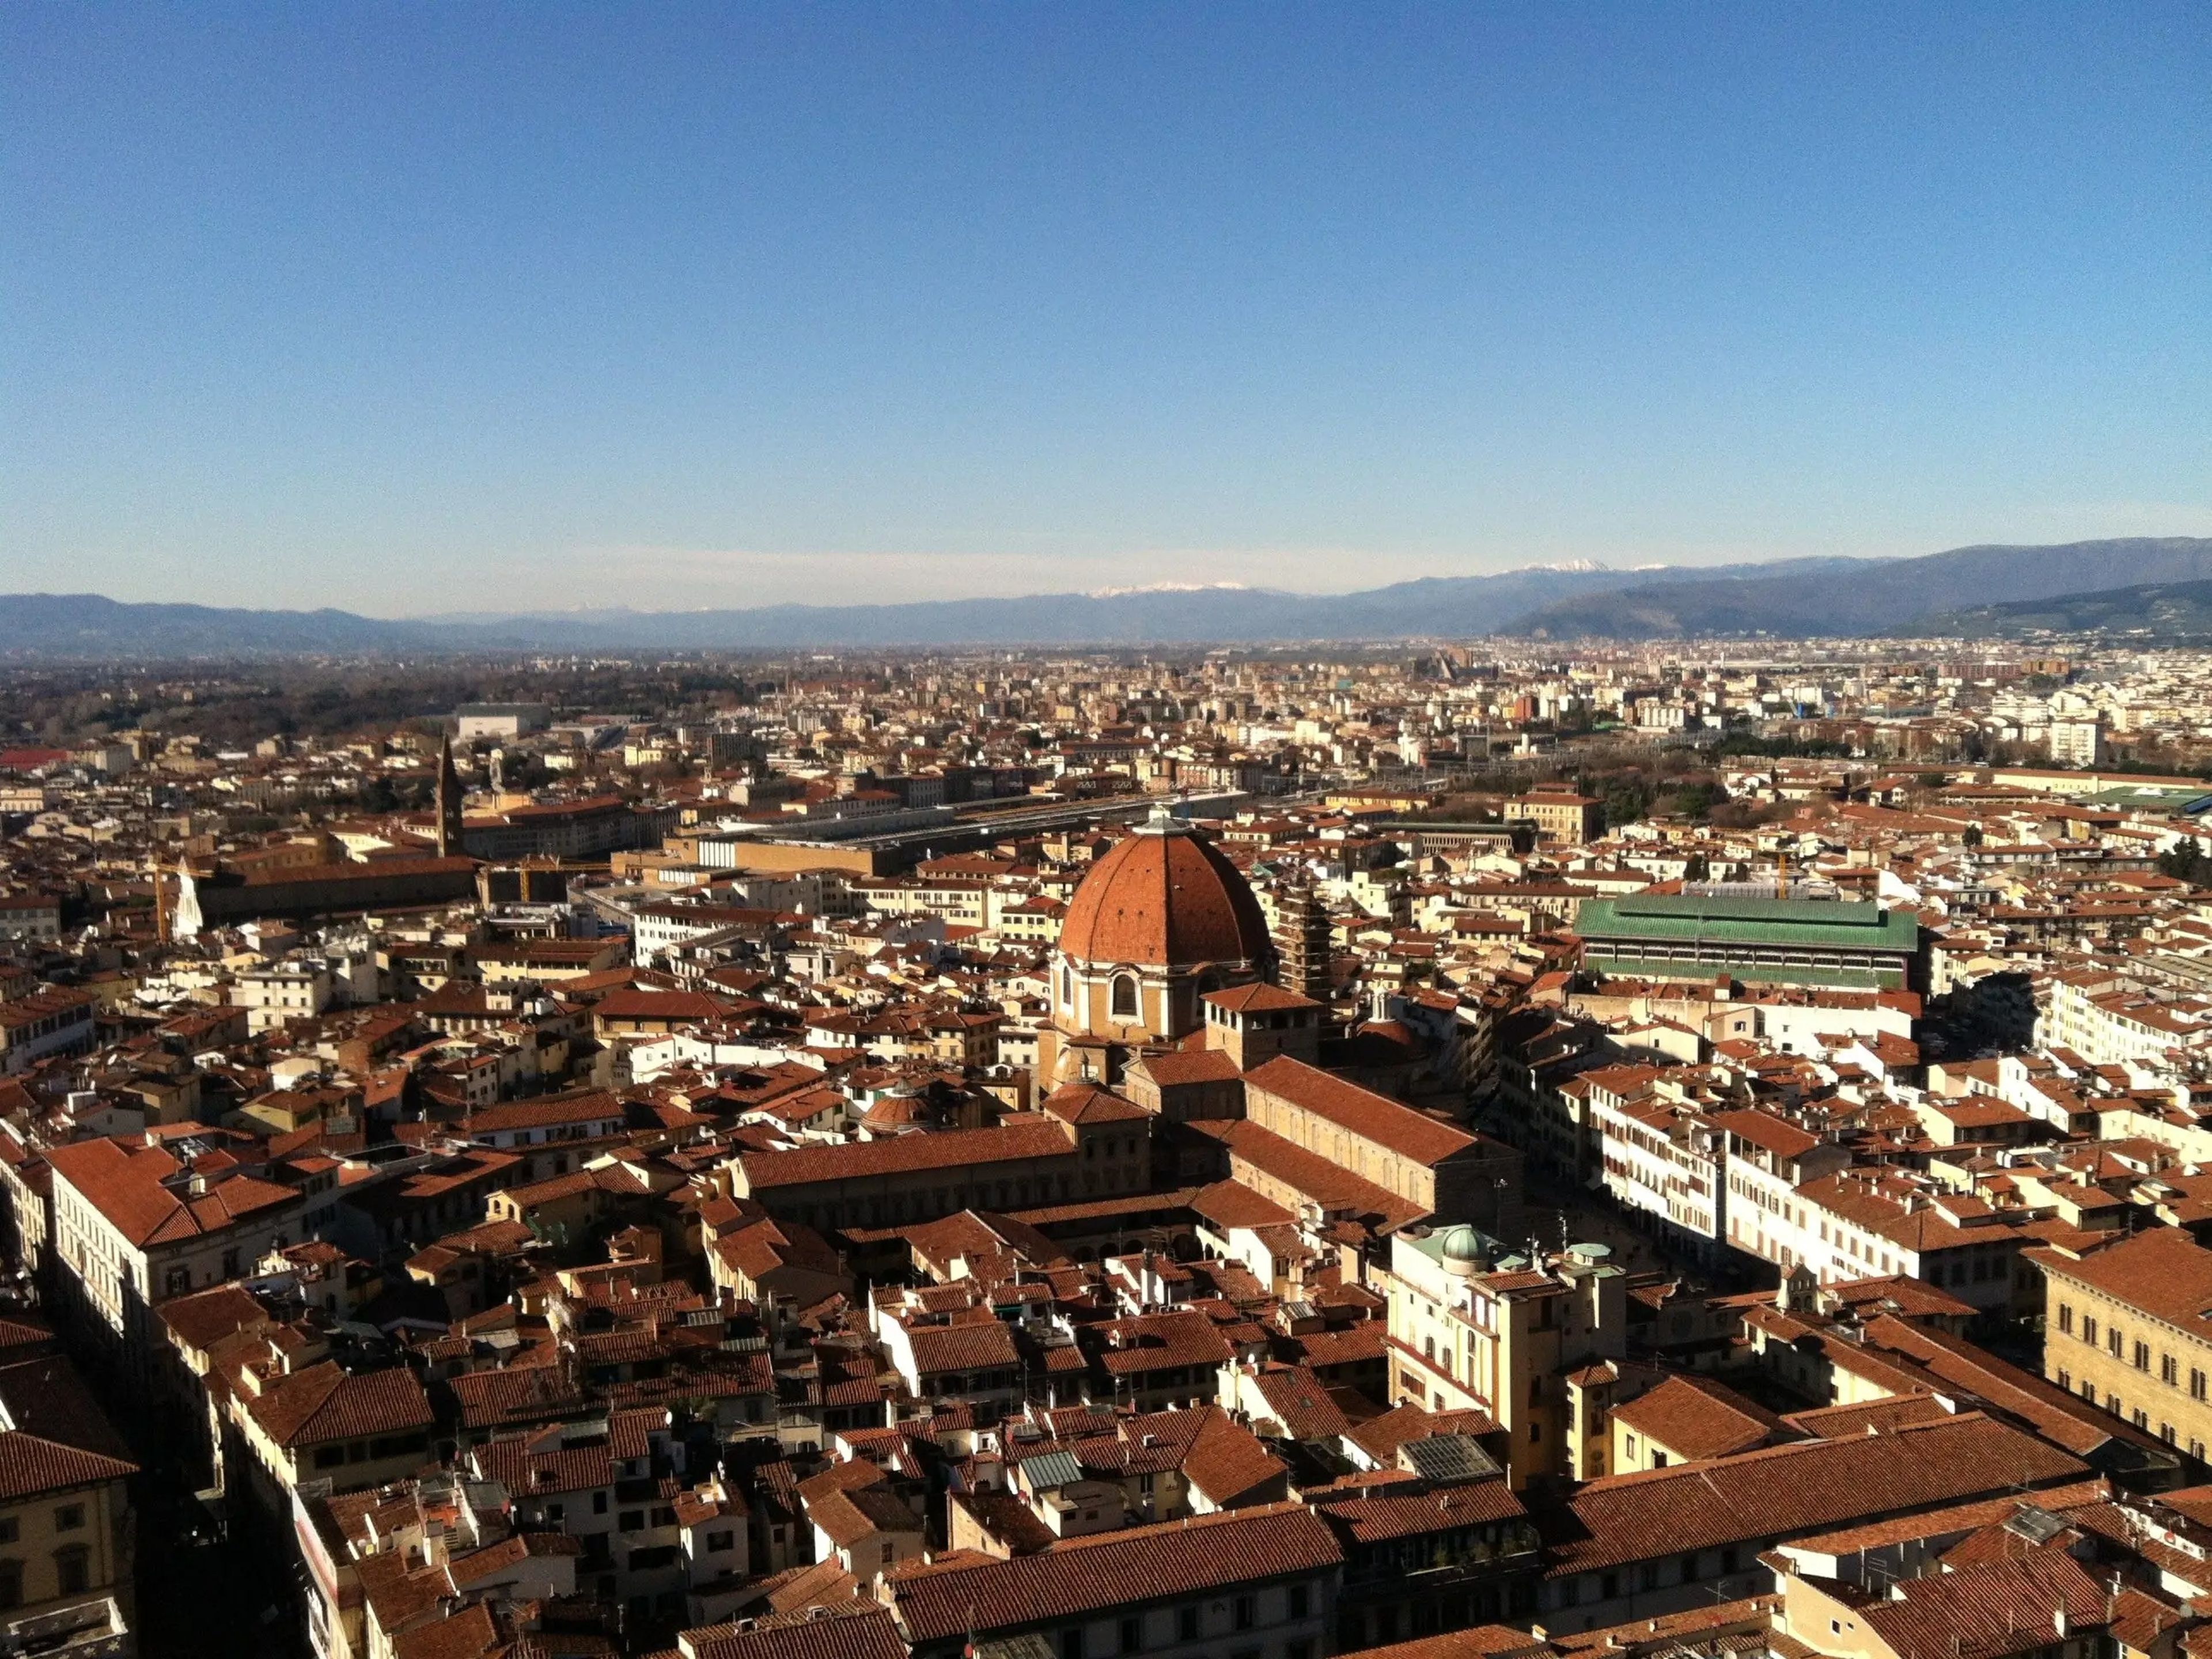 An aerial view of buildings in Florence, Italy, with mountains in the background.